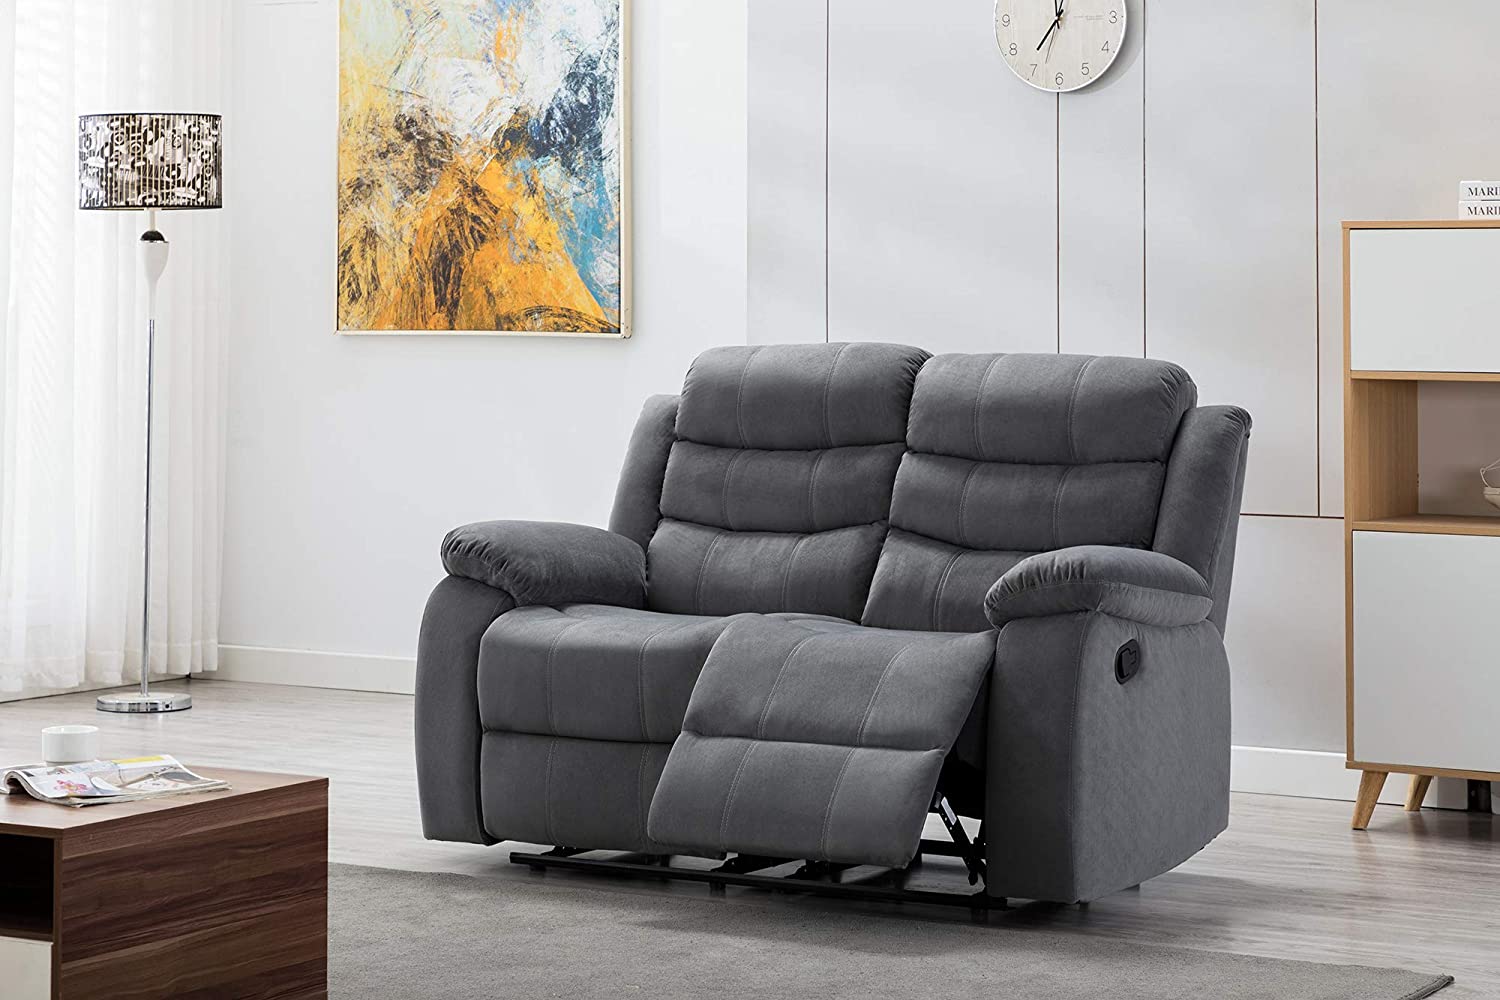 Best Reclining Sofa Review - Tips & Interior Design in 2020